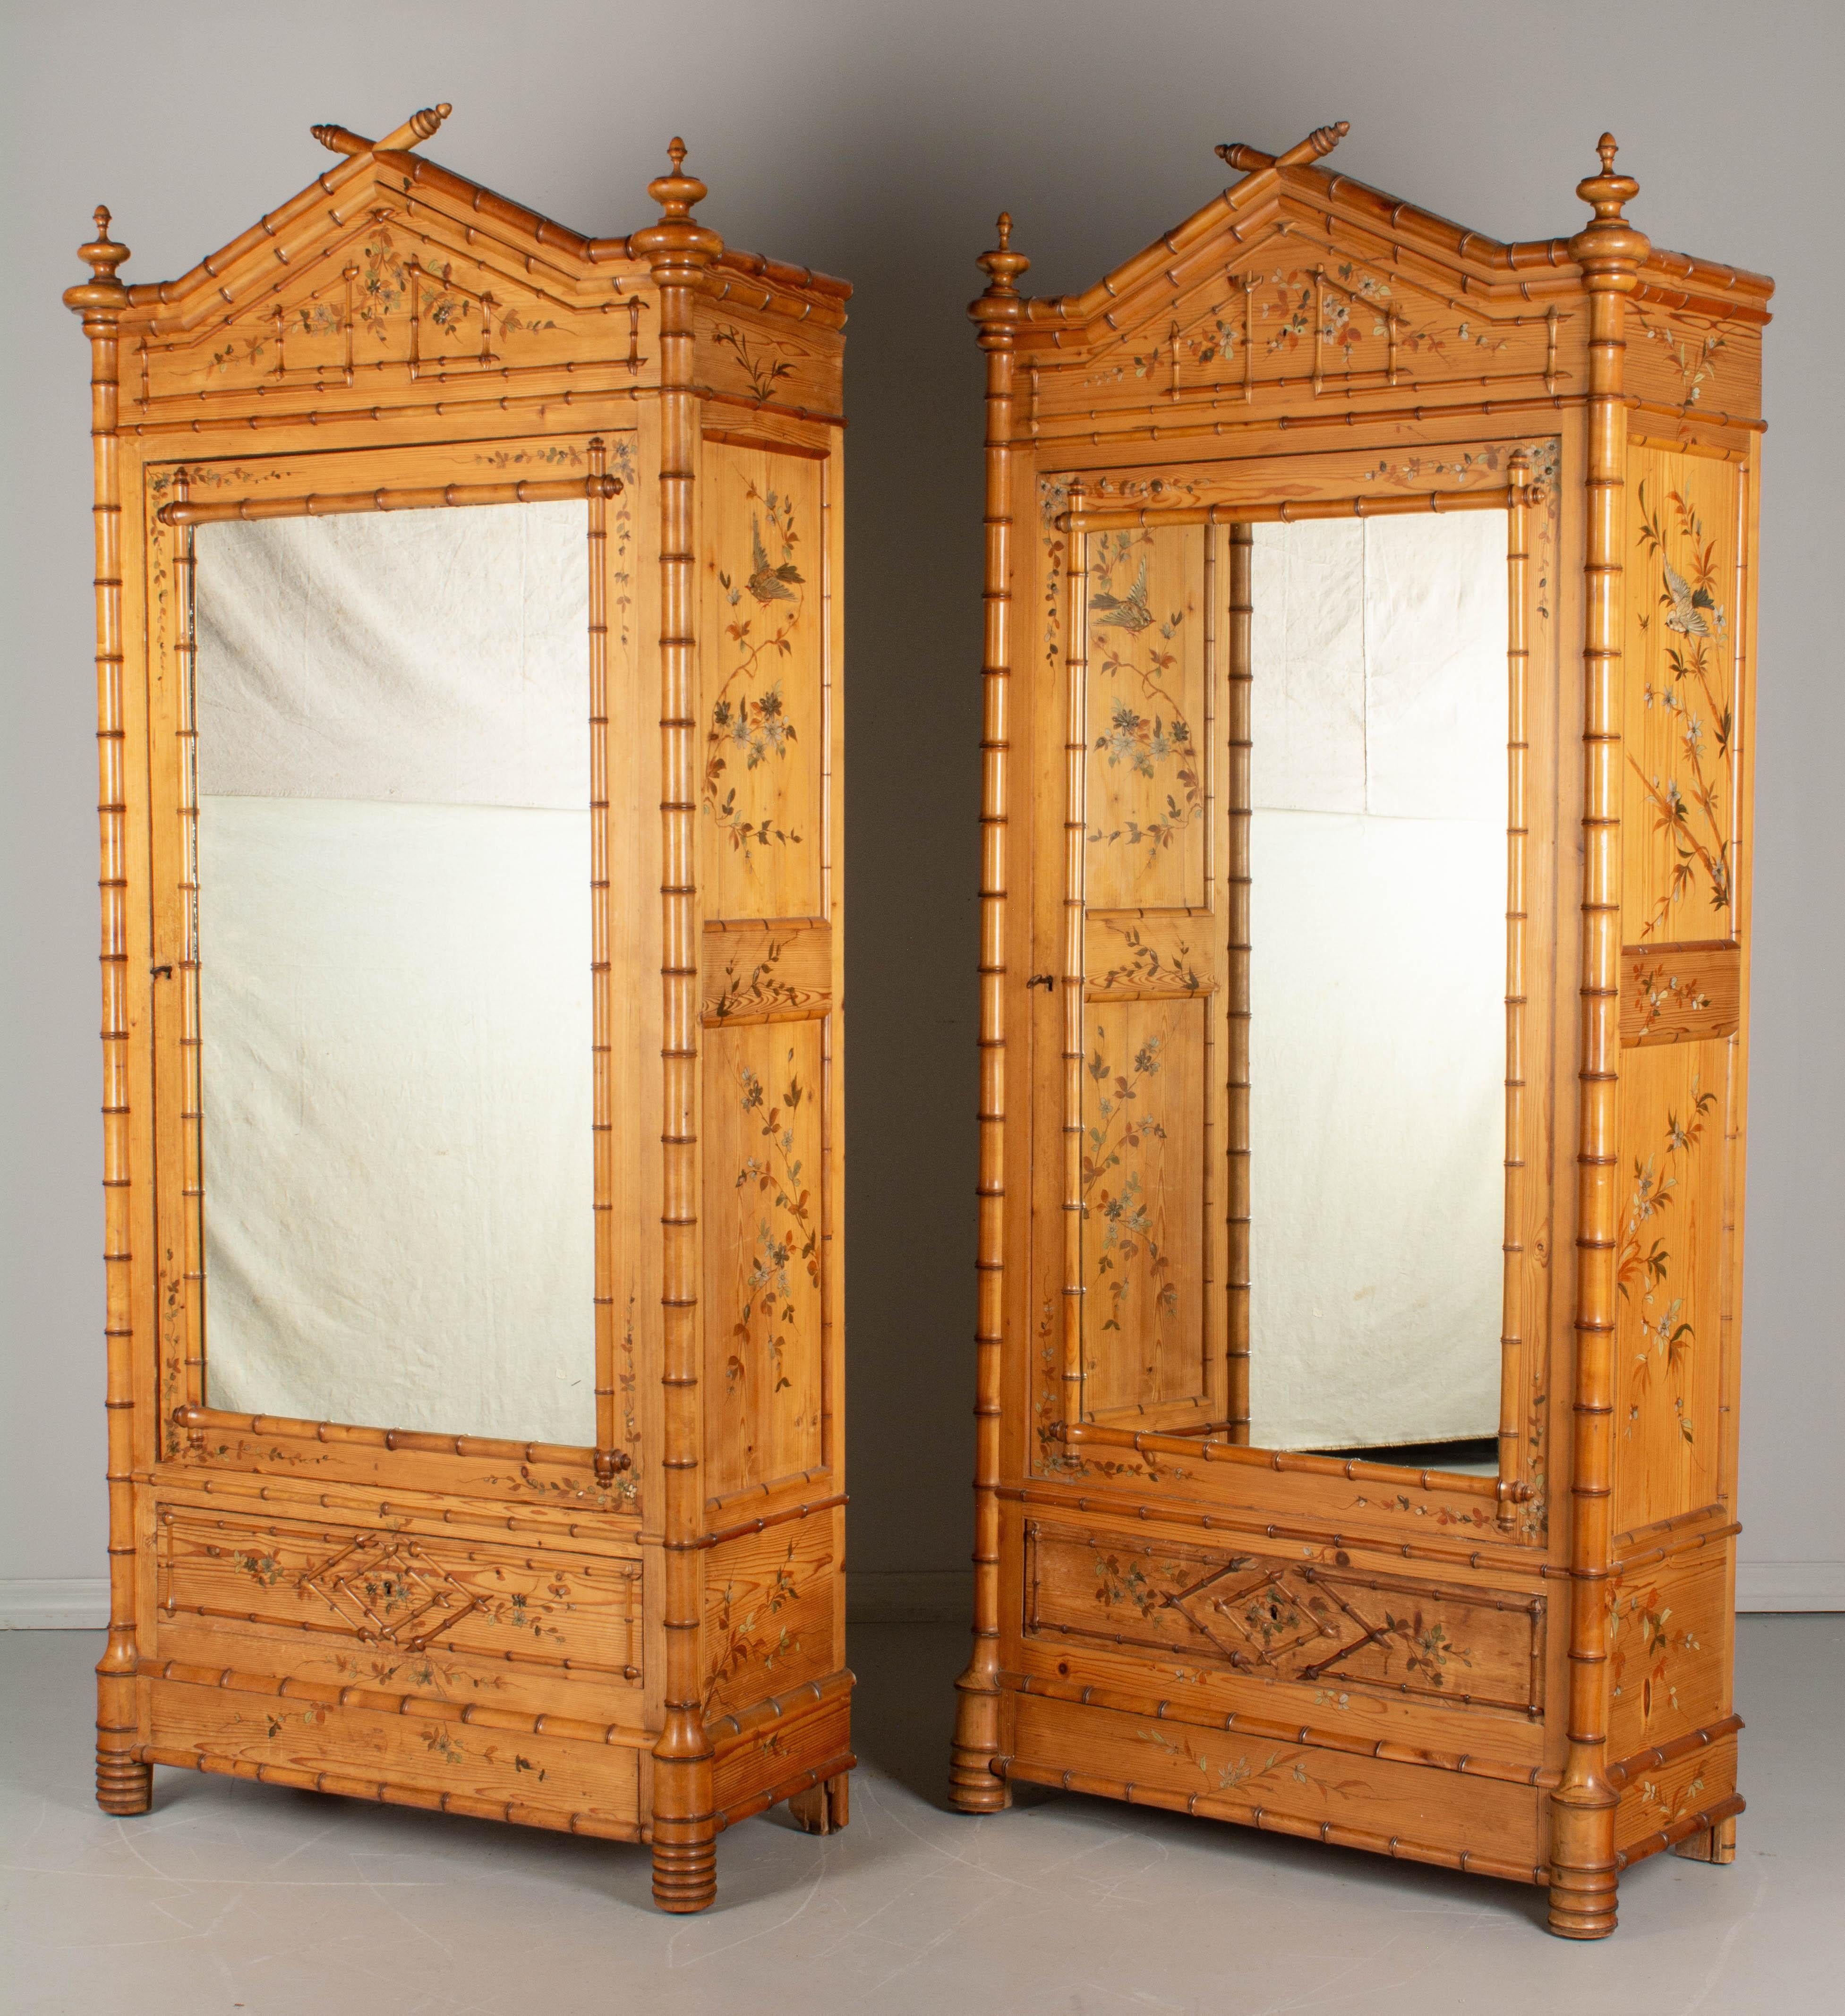 A pair of French faux bamboo armoires, or wardrobes, made of pine with solid cherry faux bamboo details and mirrored door. Hand painted chinoiserie style decoration: pale green and orange flowering vines and silver birds in raised relief. Some paint